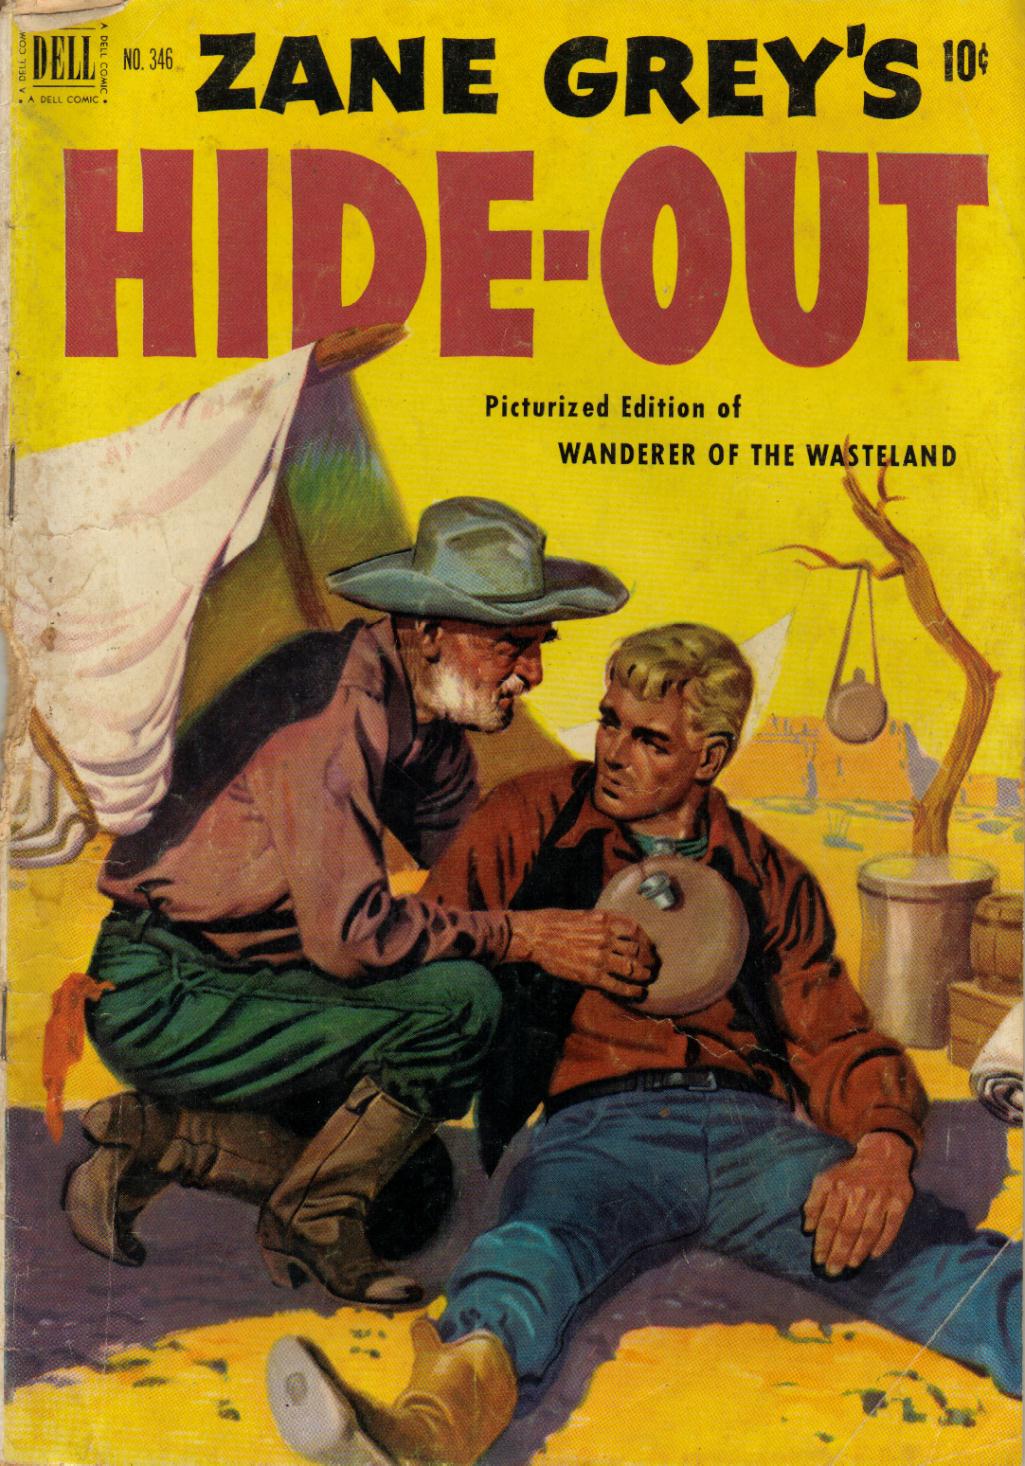 Book Cover For 0346 - Zane Grey's Hideout